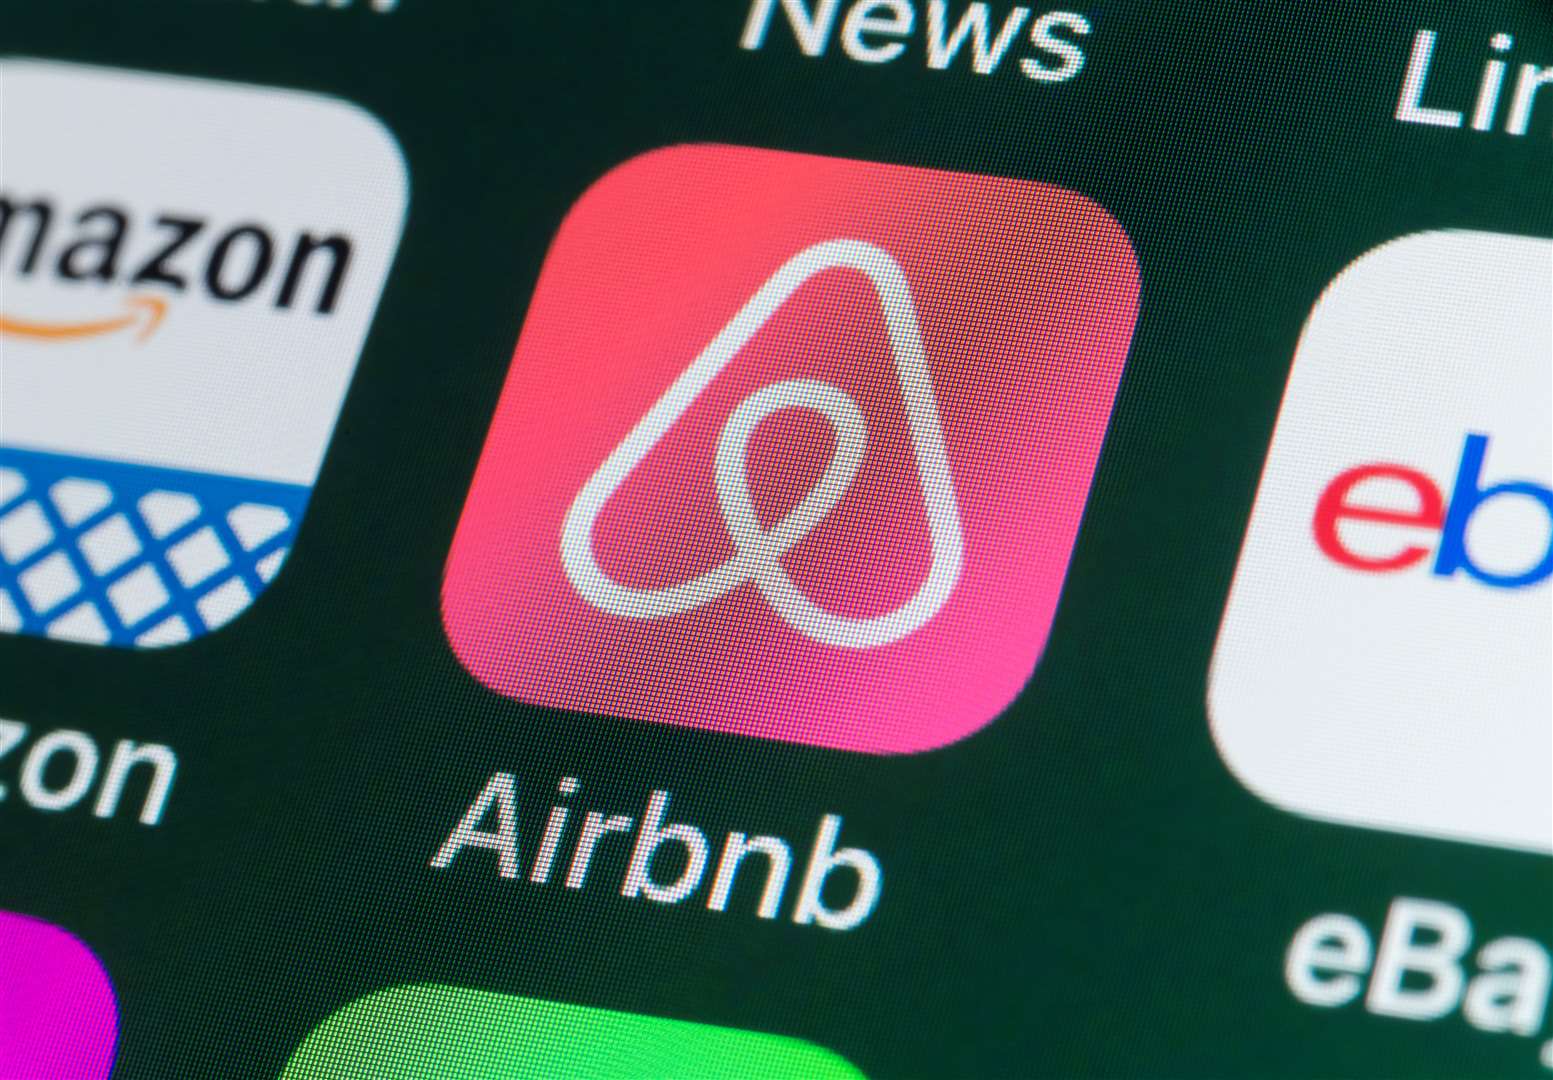 Airbnb is pushing local people out of communities, says Melissa Todd. Stock image